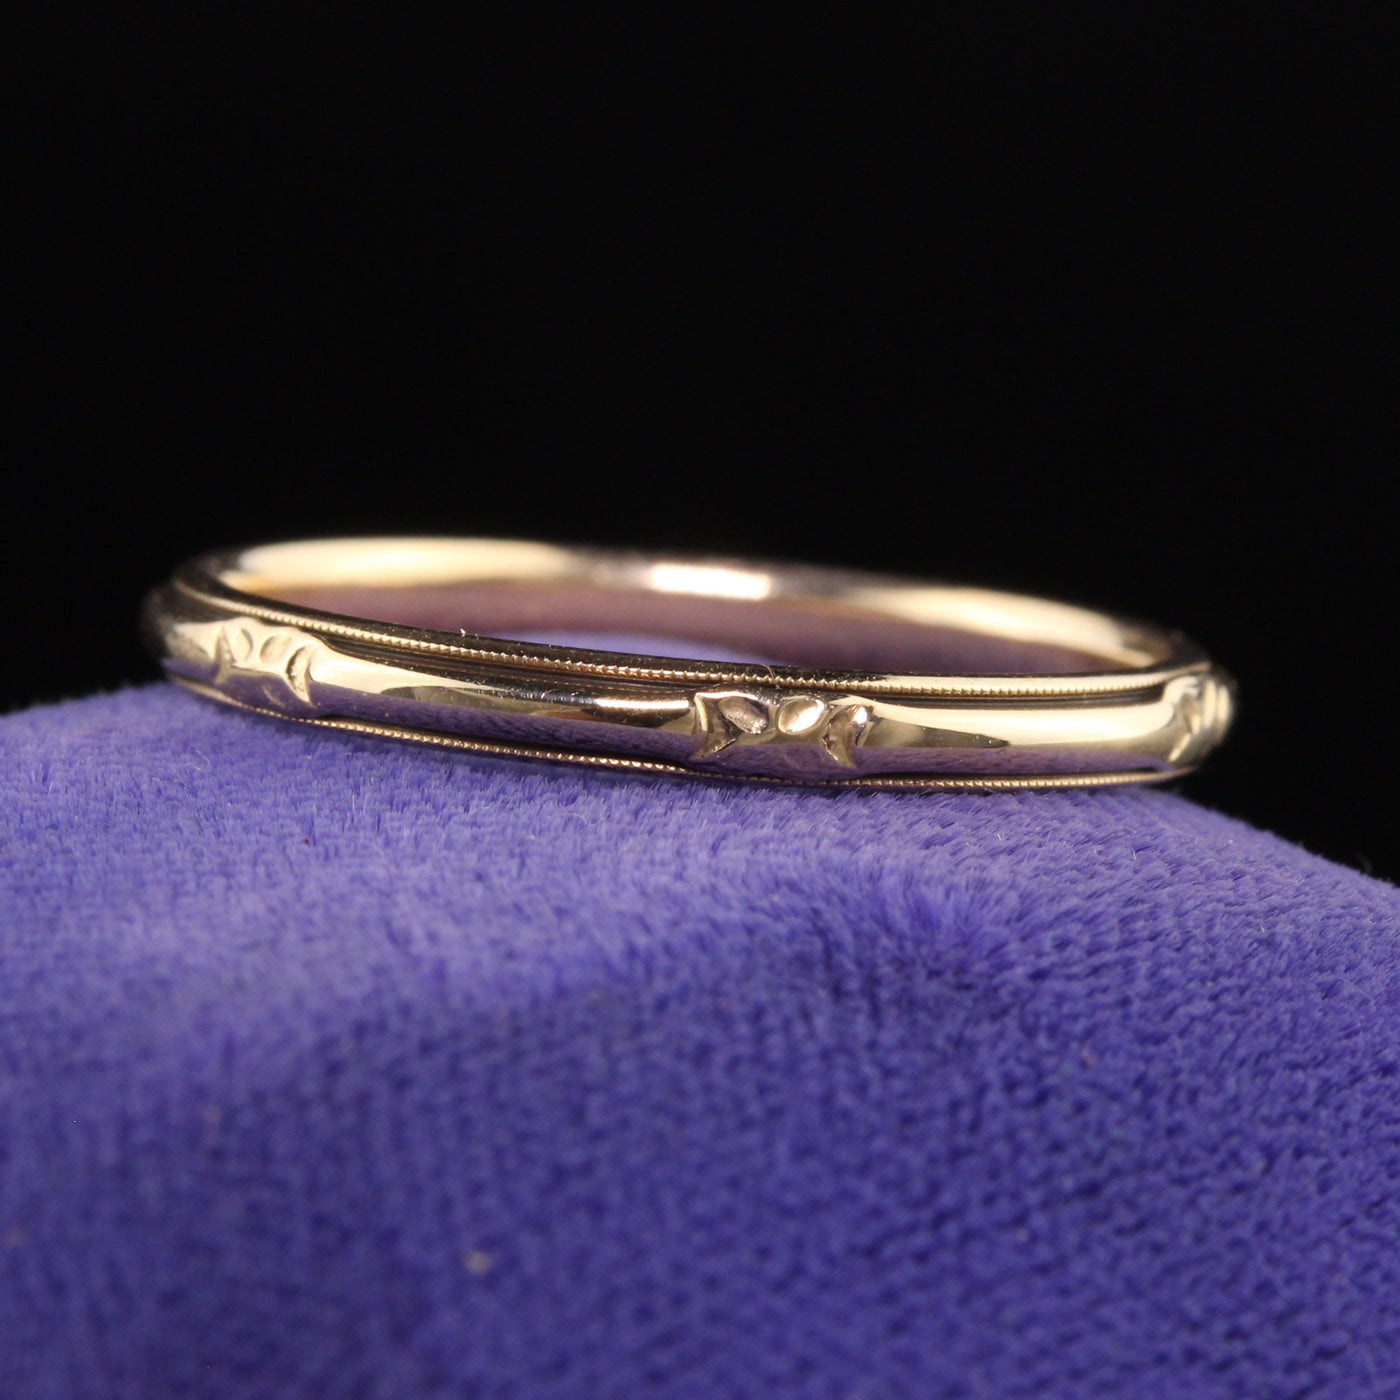 Antique Art Deco Wood and Sons 14K Yellow Gold Engraved Wedding Band